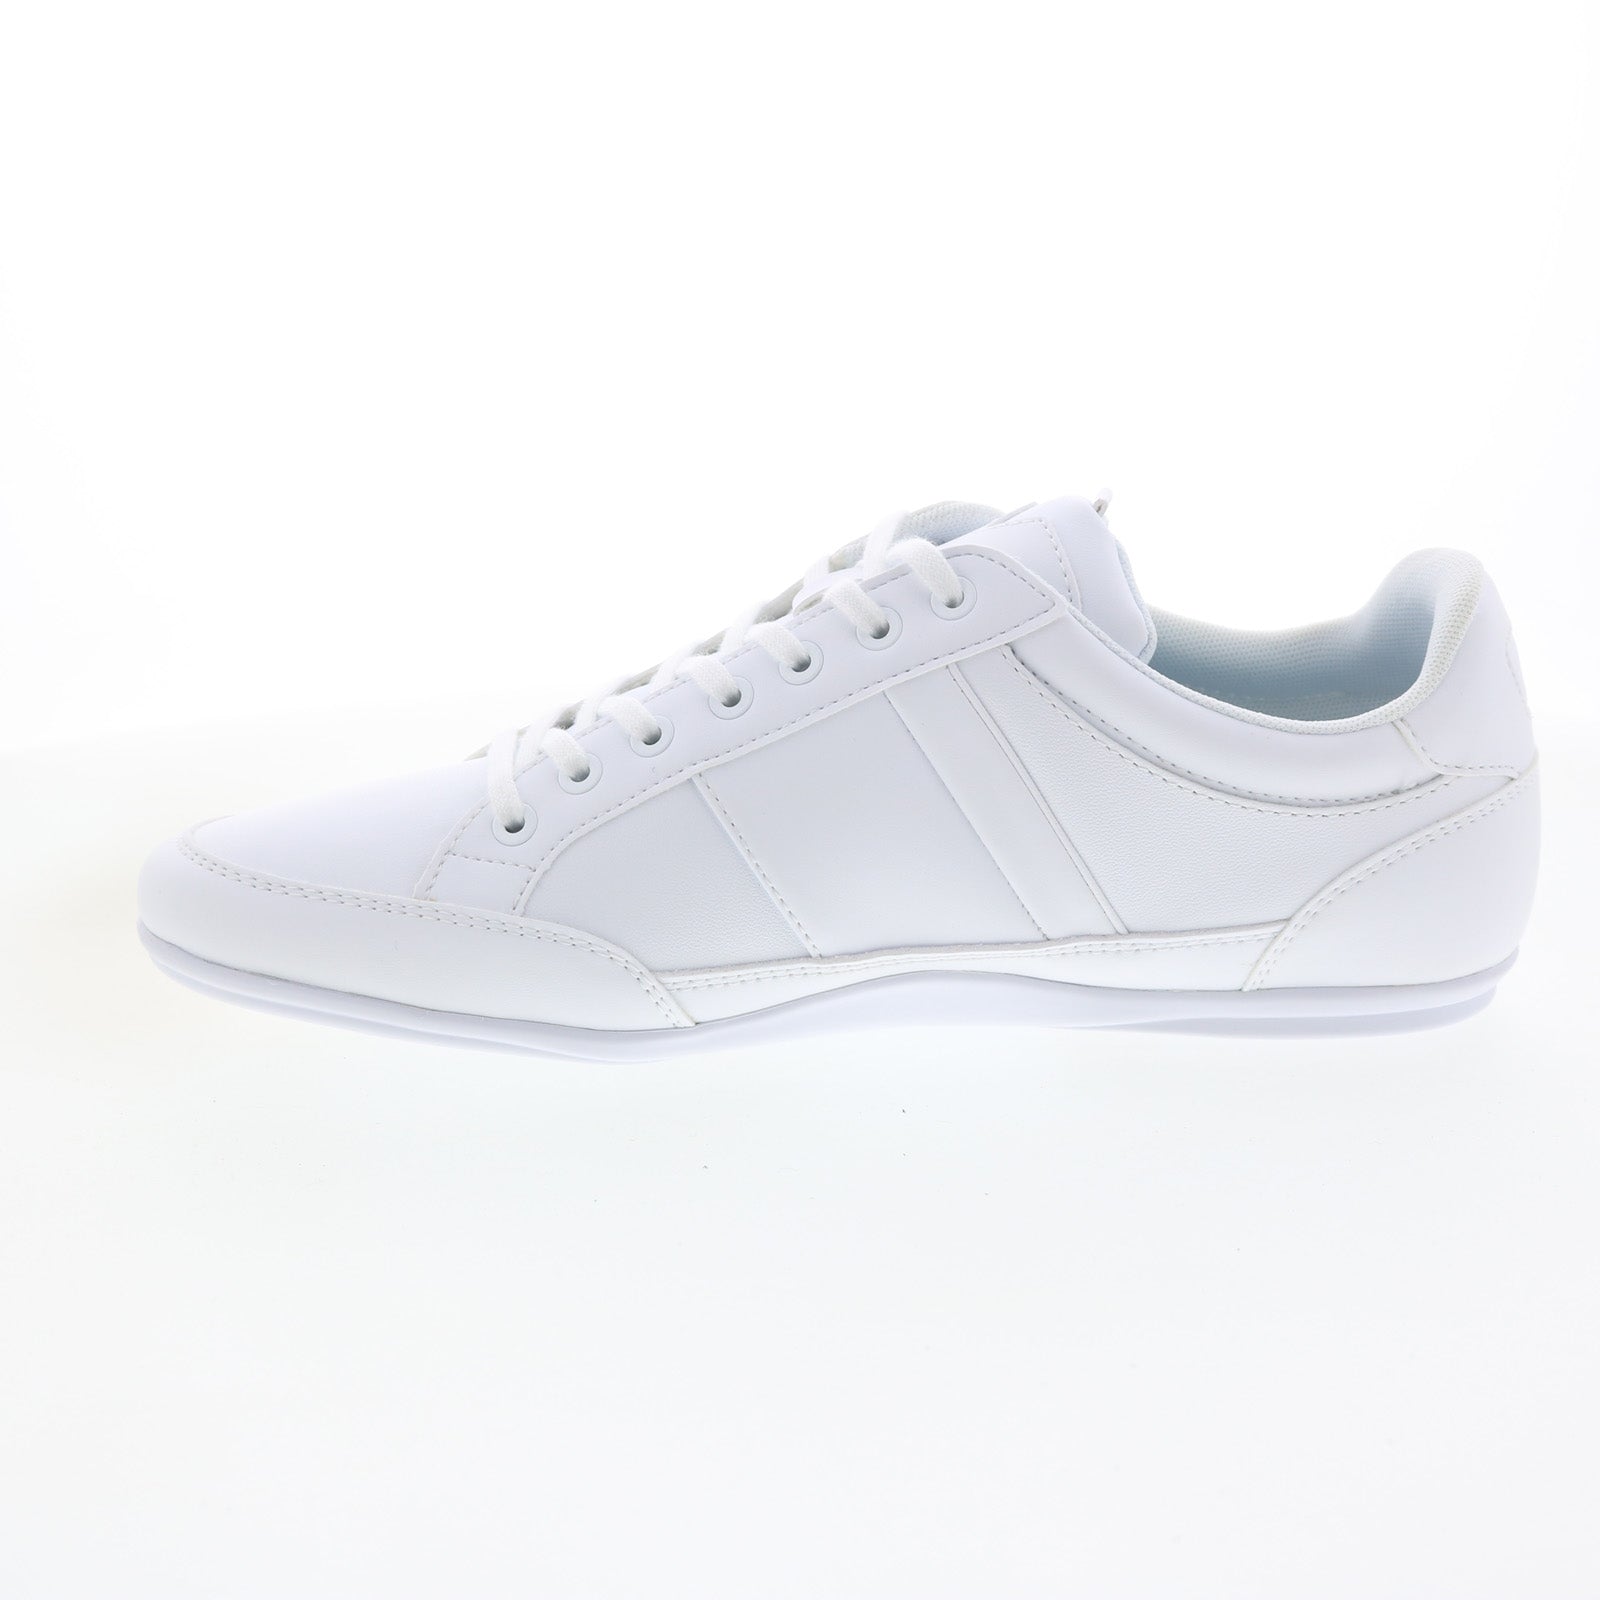 Lacoste Chaymon BL 21 1 Mens White Lifestyle Sneakers S - Shoes